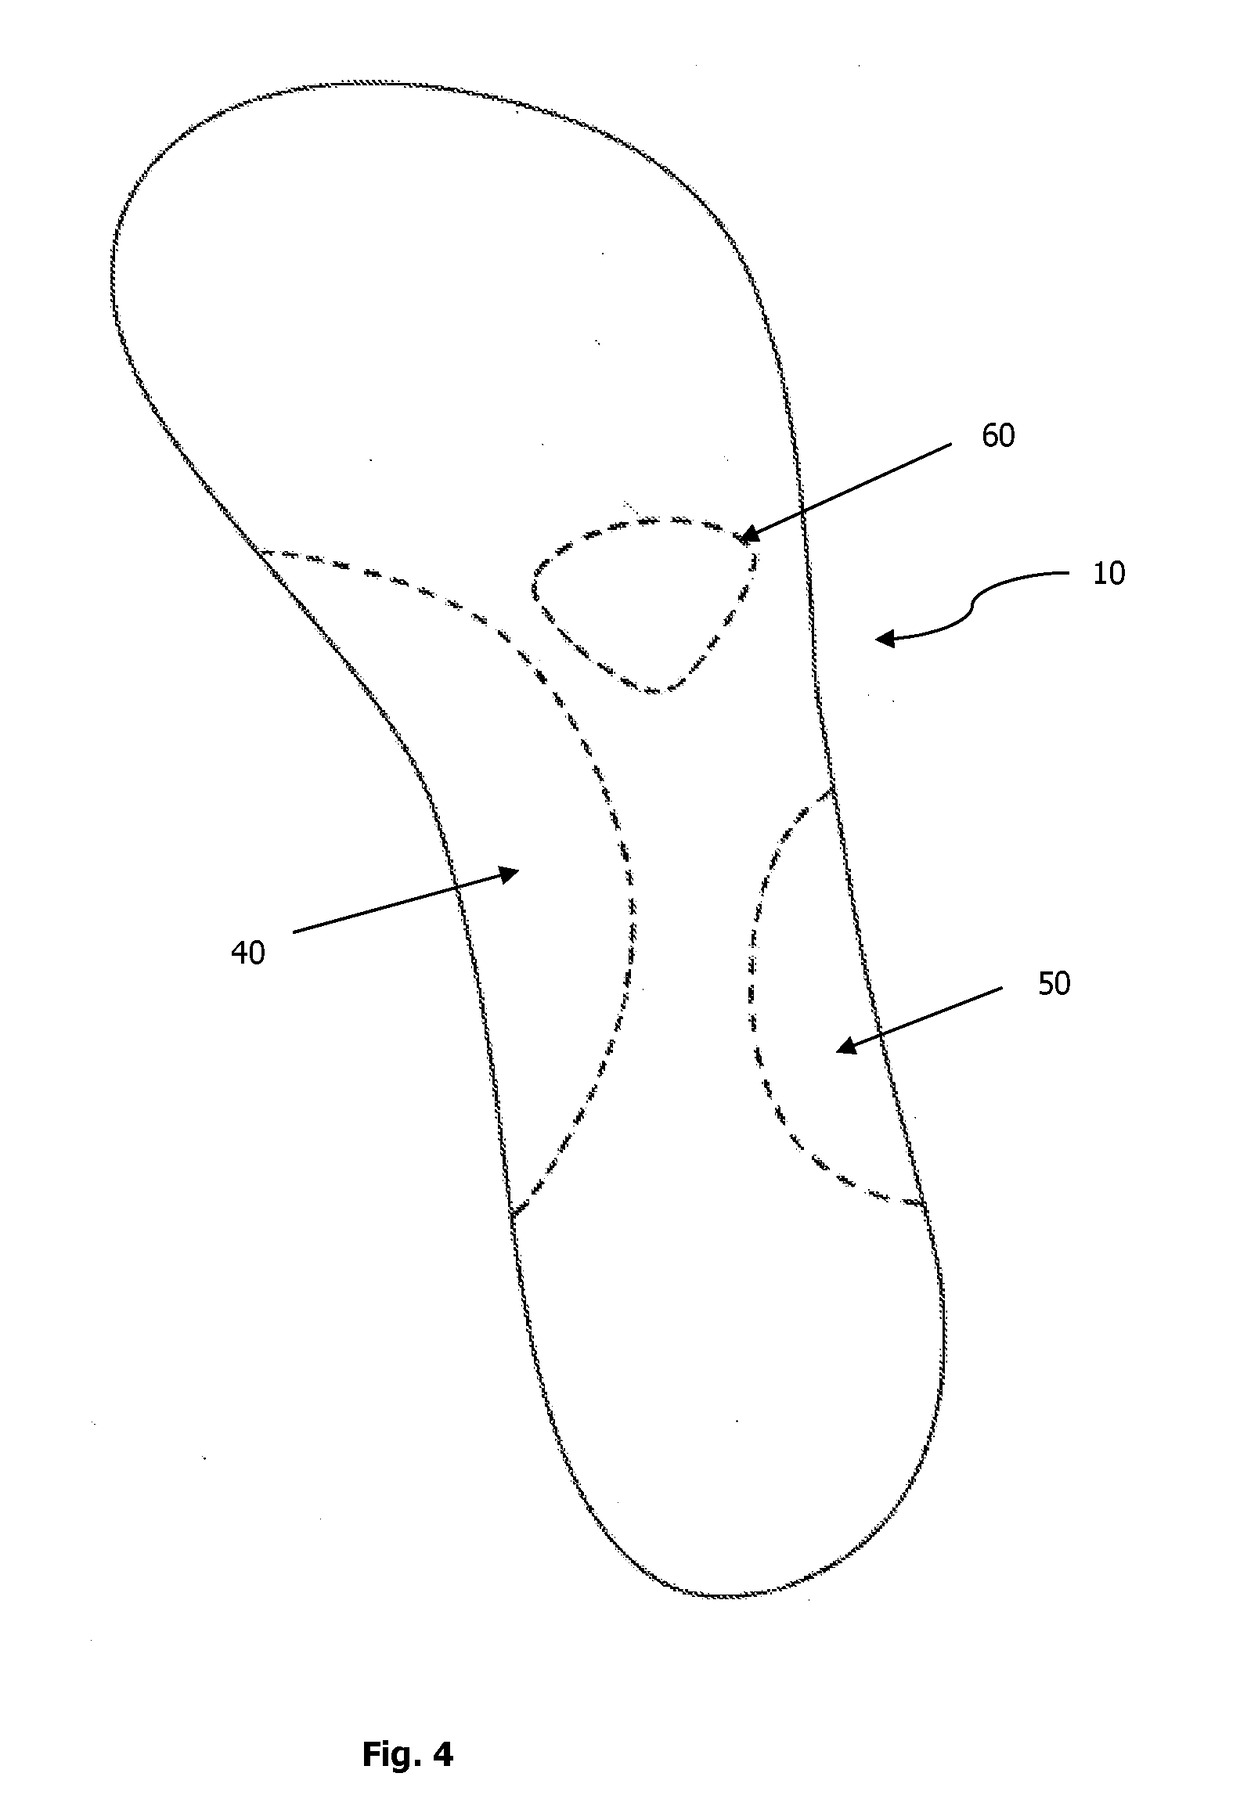 Orthotic device for shoes